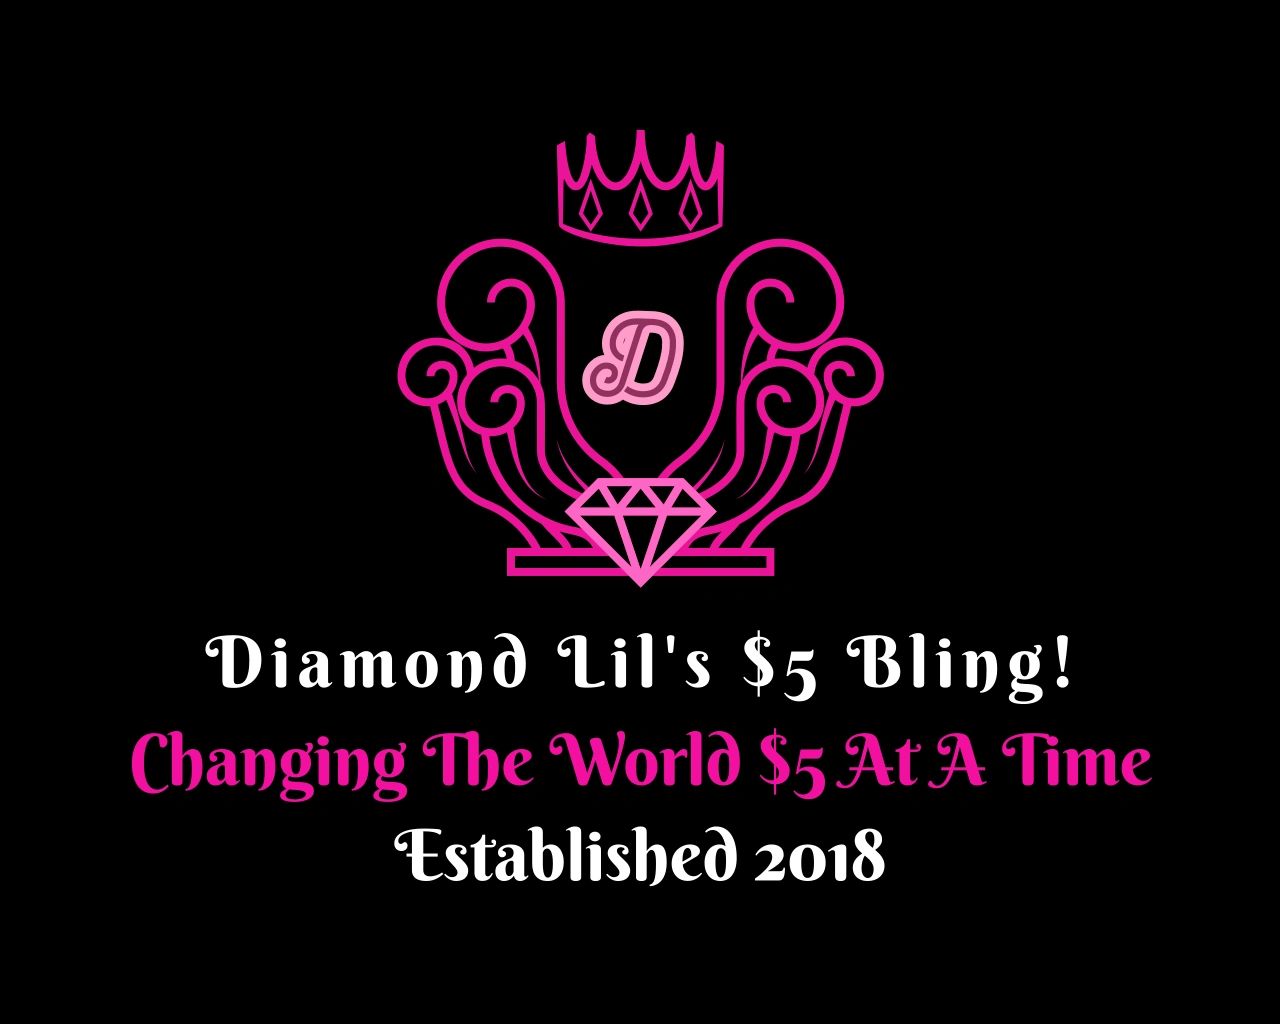 Are you curious? www.my5dollarbling.com  Paparazzi jewelry images, Paparazzi  jewelry, Bling ideas